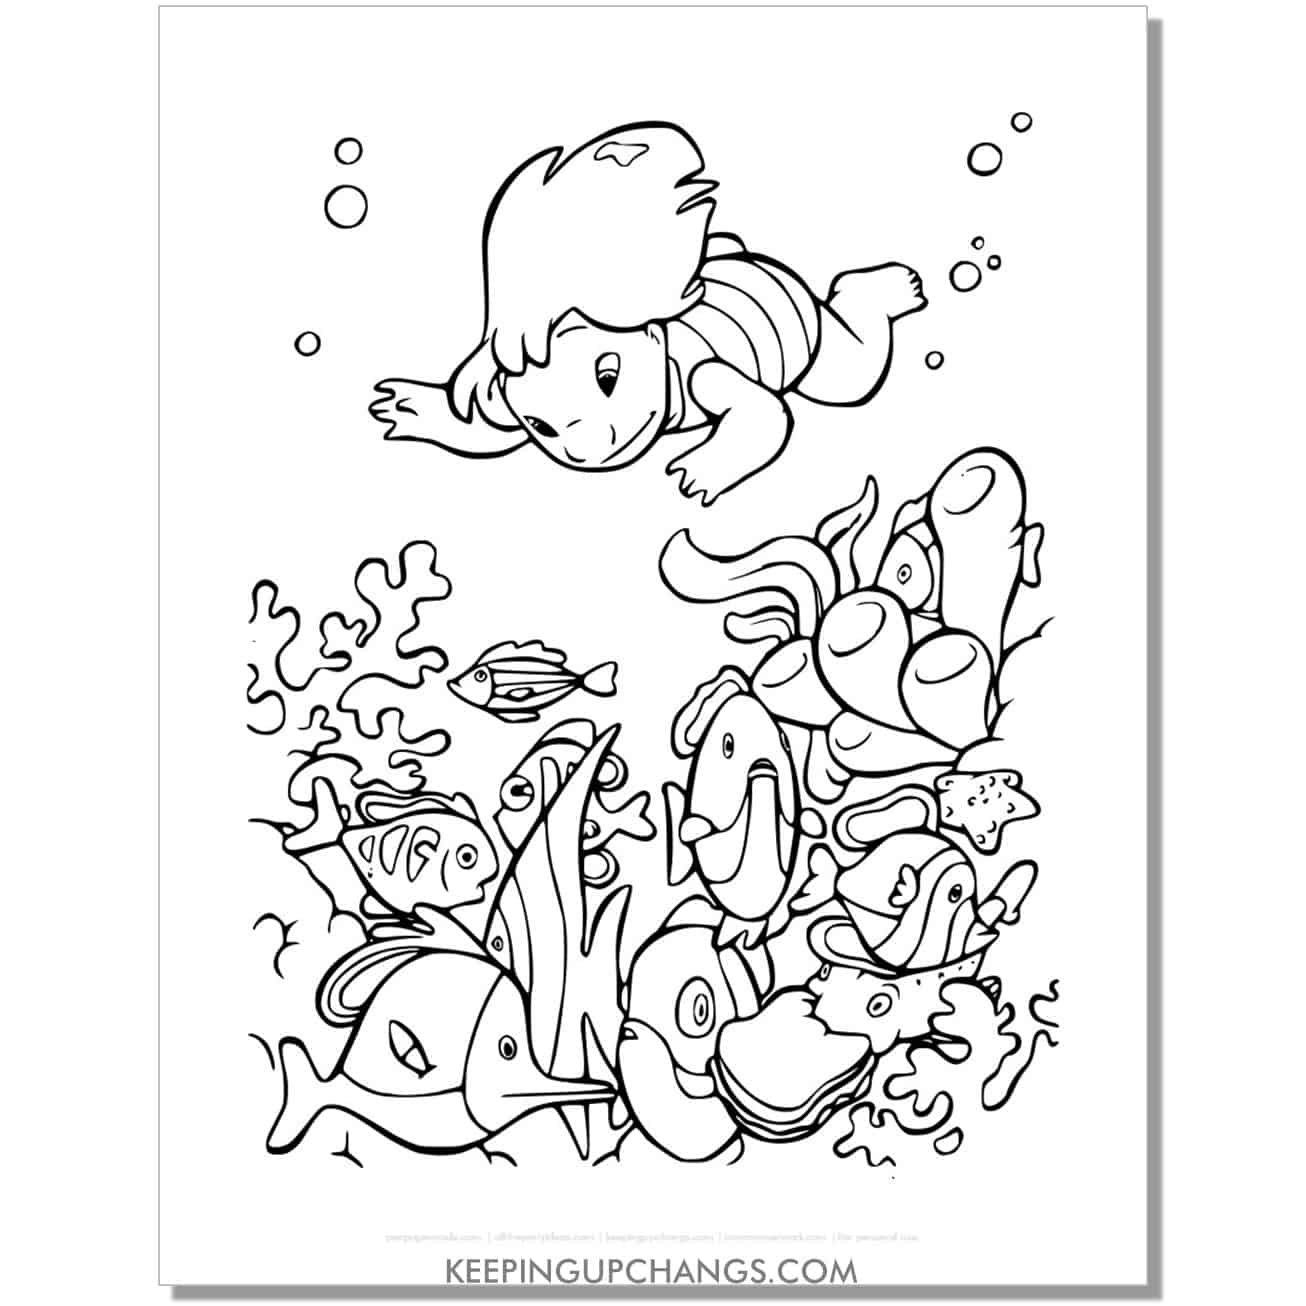 free lilo swimming, looking at fish and coral underwater coloring page.